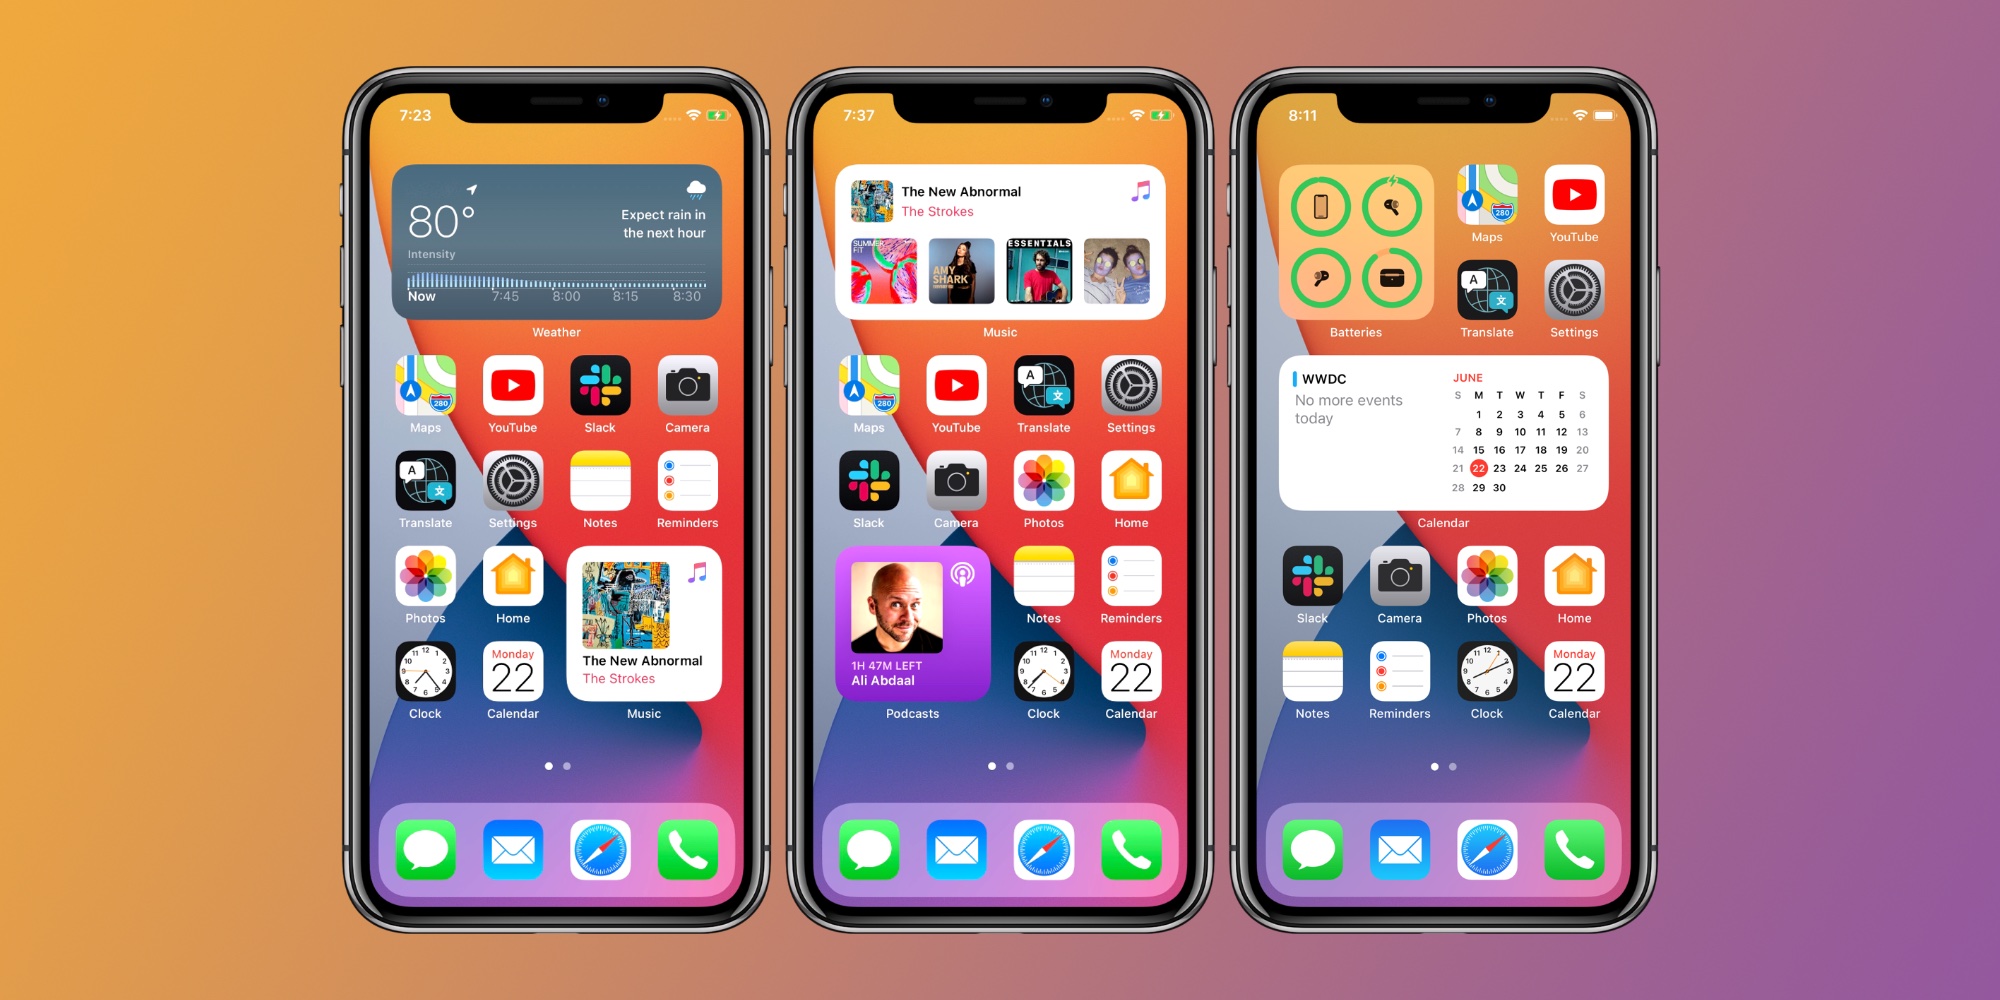 How To Use Iphone Home Screen Widgets In Ios 14 9to5mac